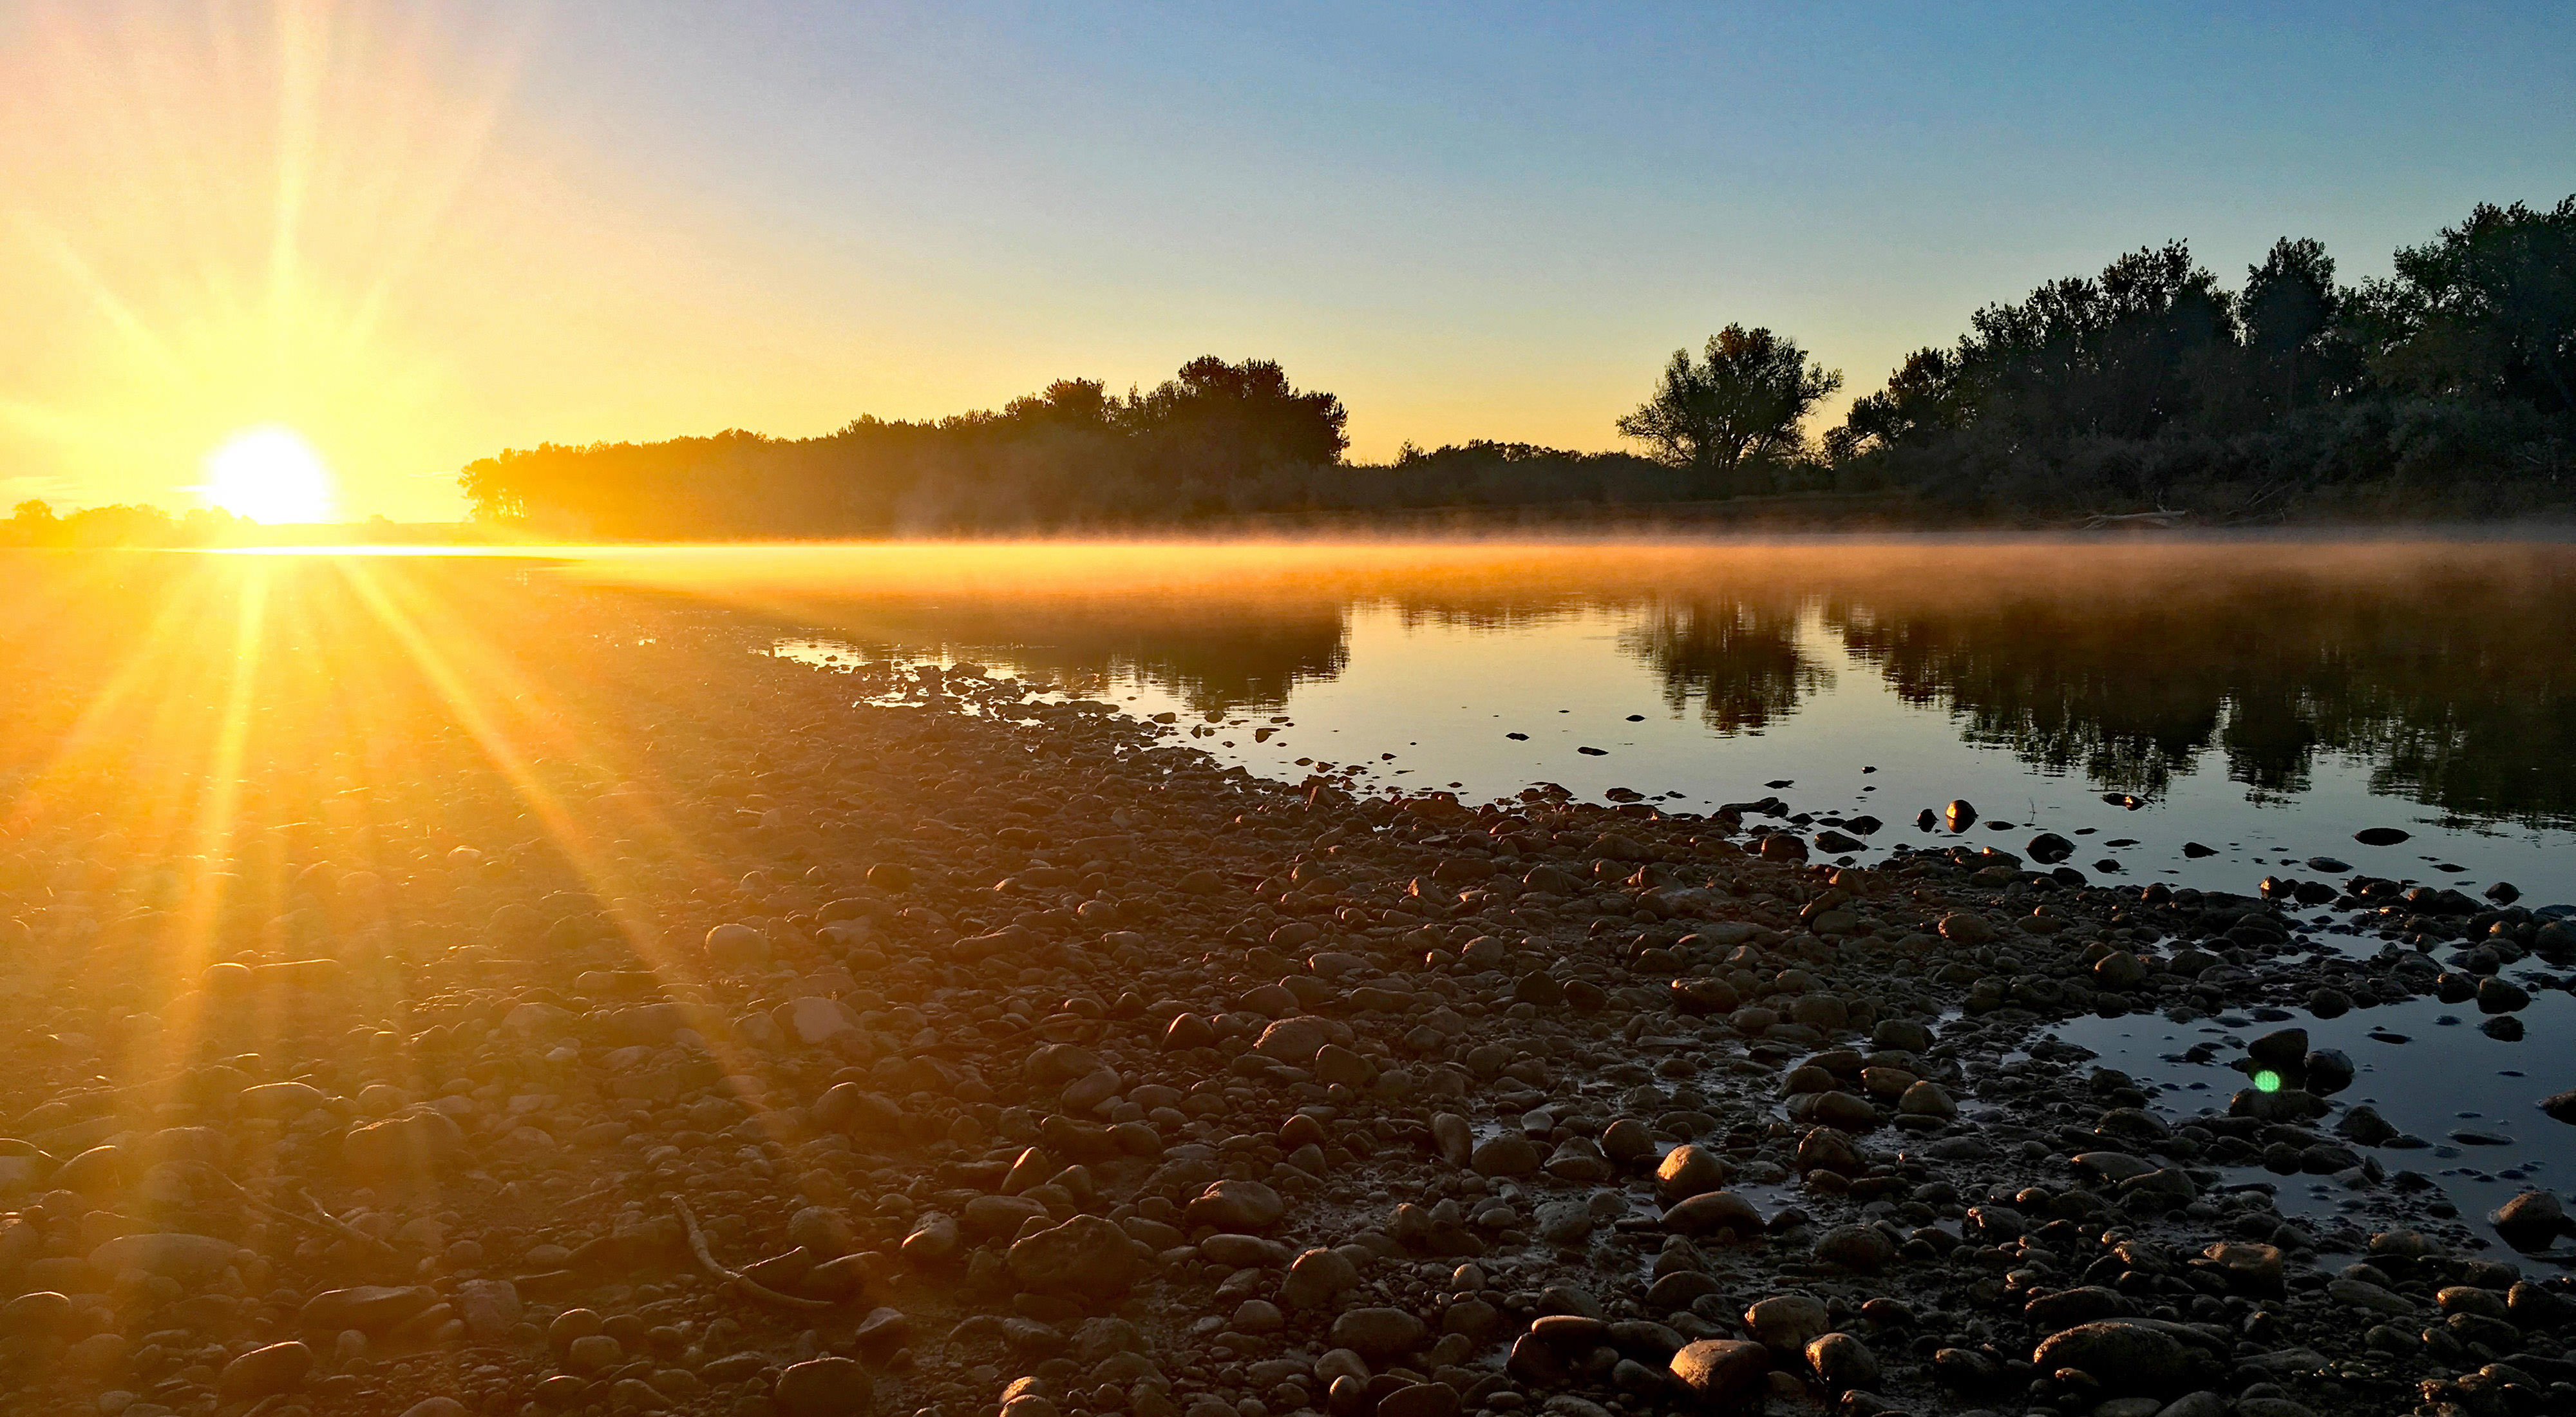 Photo of a sunrise over a river, with rocks in the foreground.